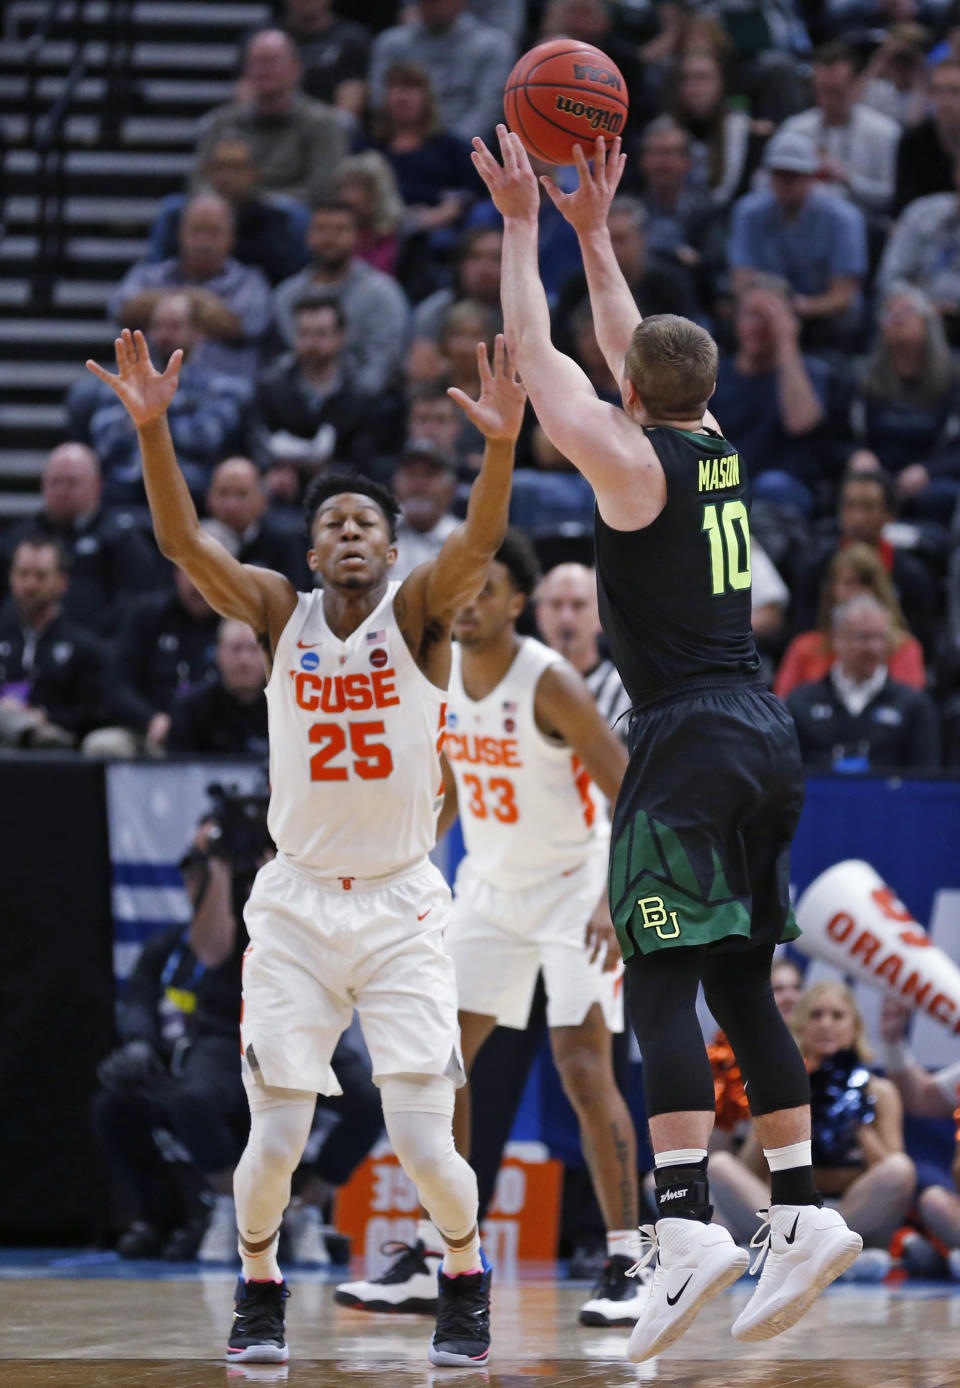 Baylor guard Makai Mason (10) shoots as Syracuse guard Tyus Battle (25) defends during the first half of a first-round game in the NCAA men’s college basketball tournament Thursday, March 21, 2019, in Salt Lake City. (AP Photo/Rick Bowmer)